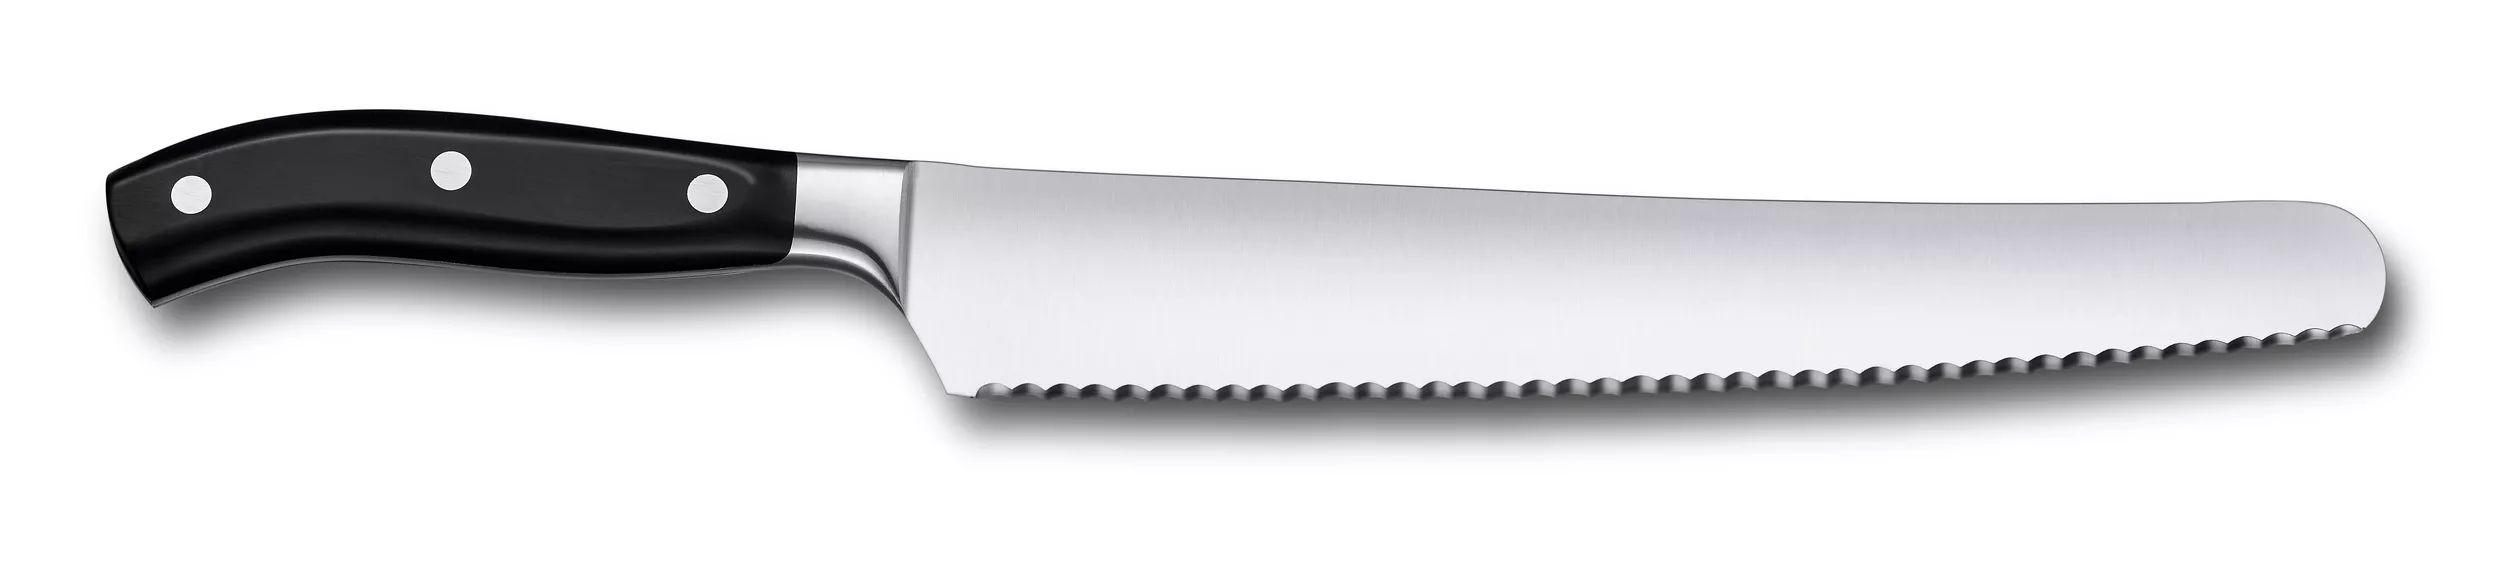 Grand Ma&icirc;tre Bread and Pastry Knife - 7.7433.26G